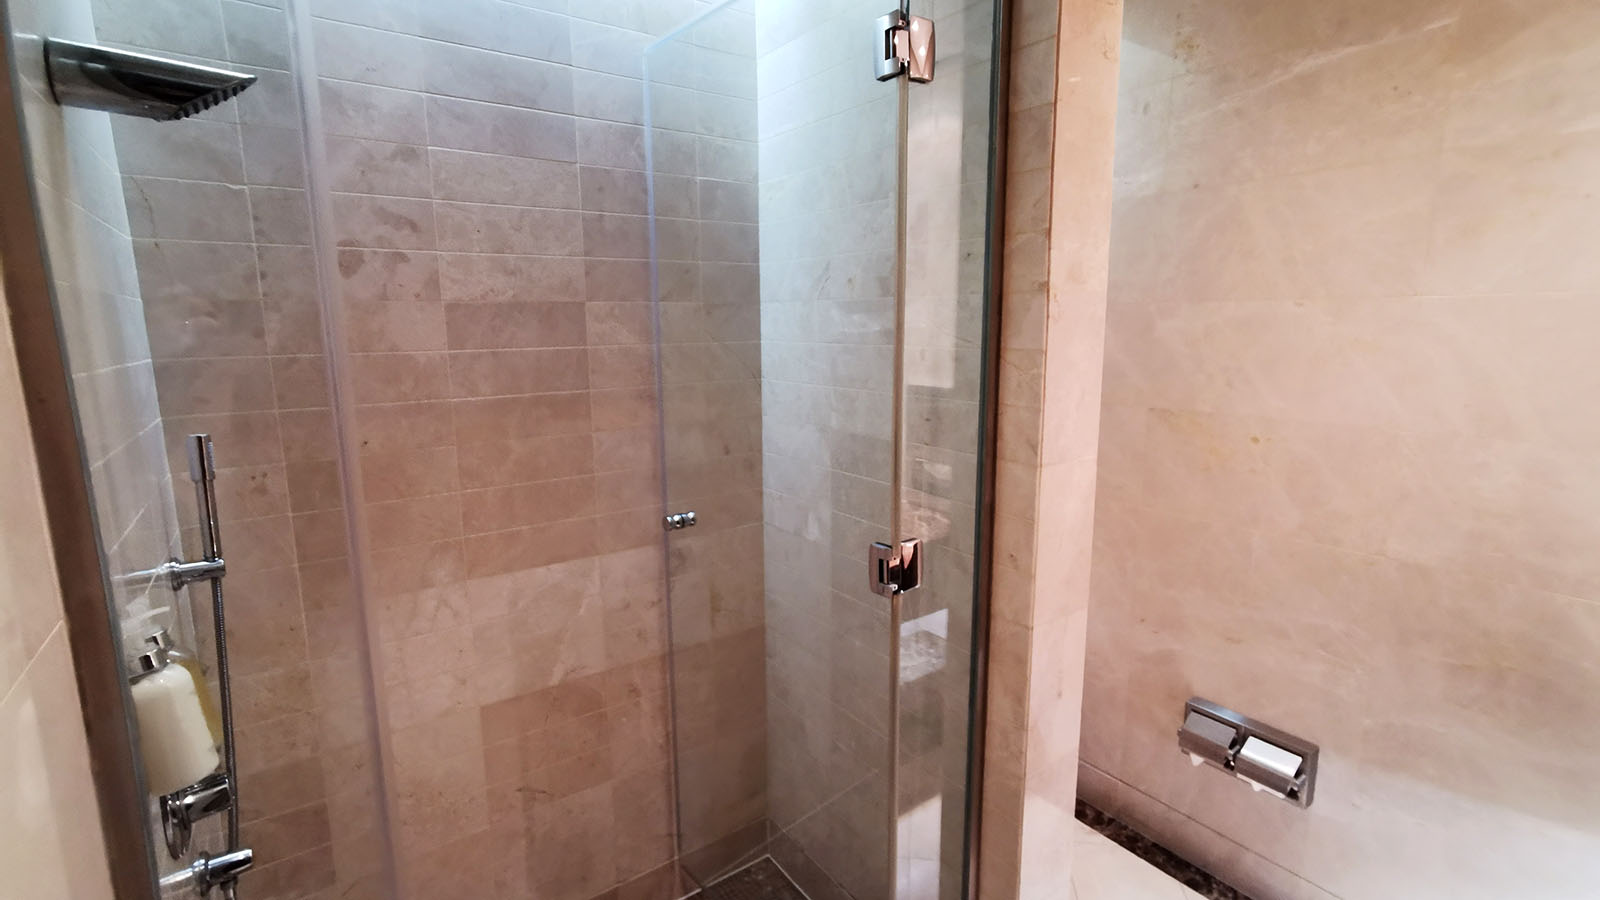 Shower suite in the Emirates First Class Lounge in Dubai Concourse A